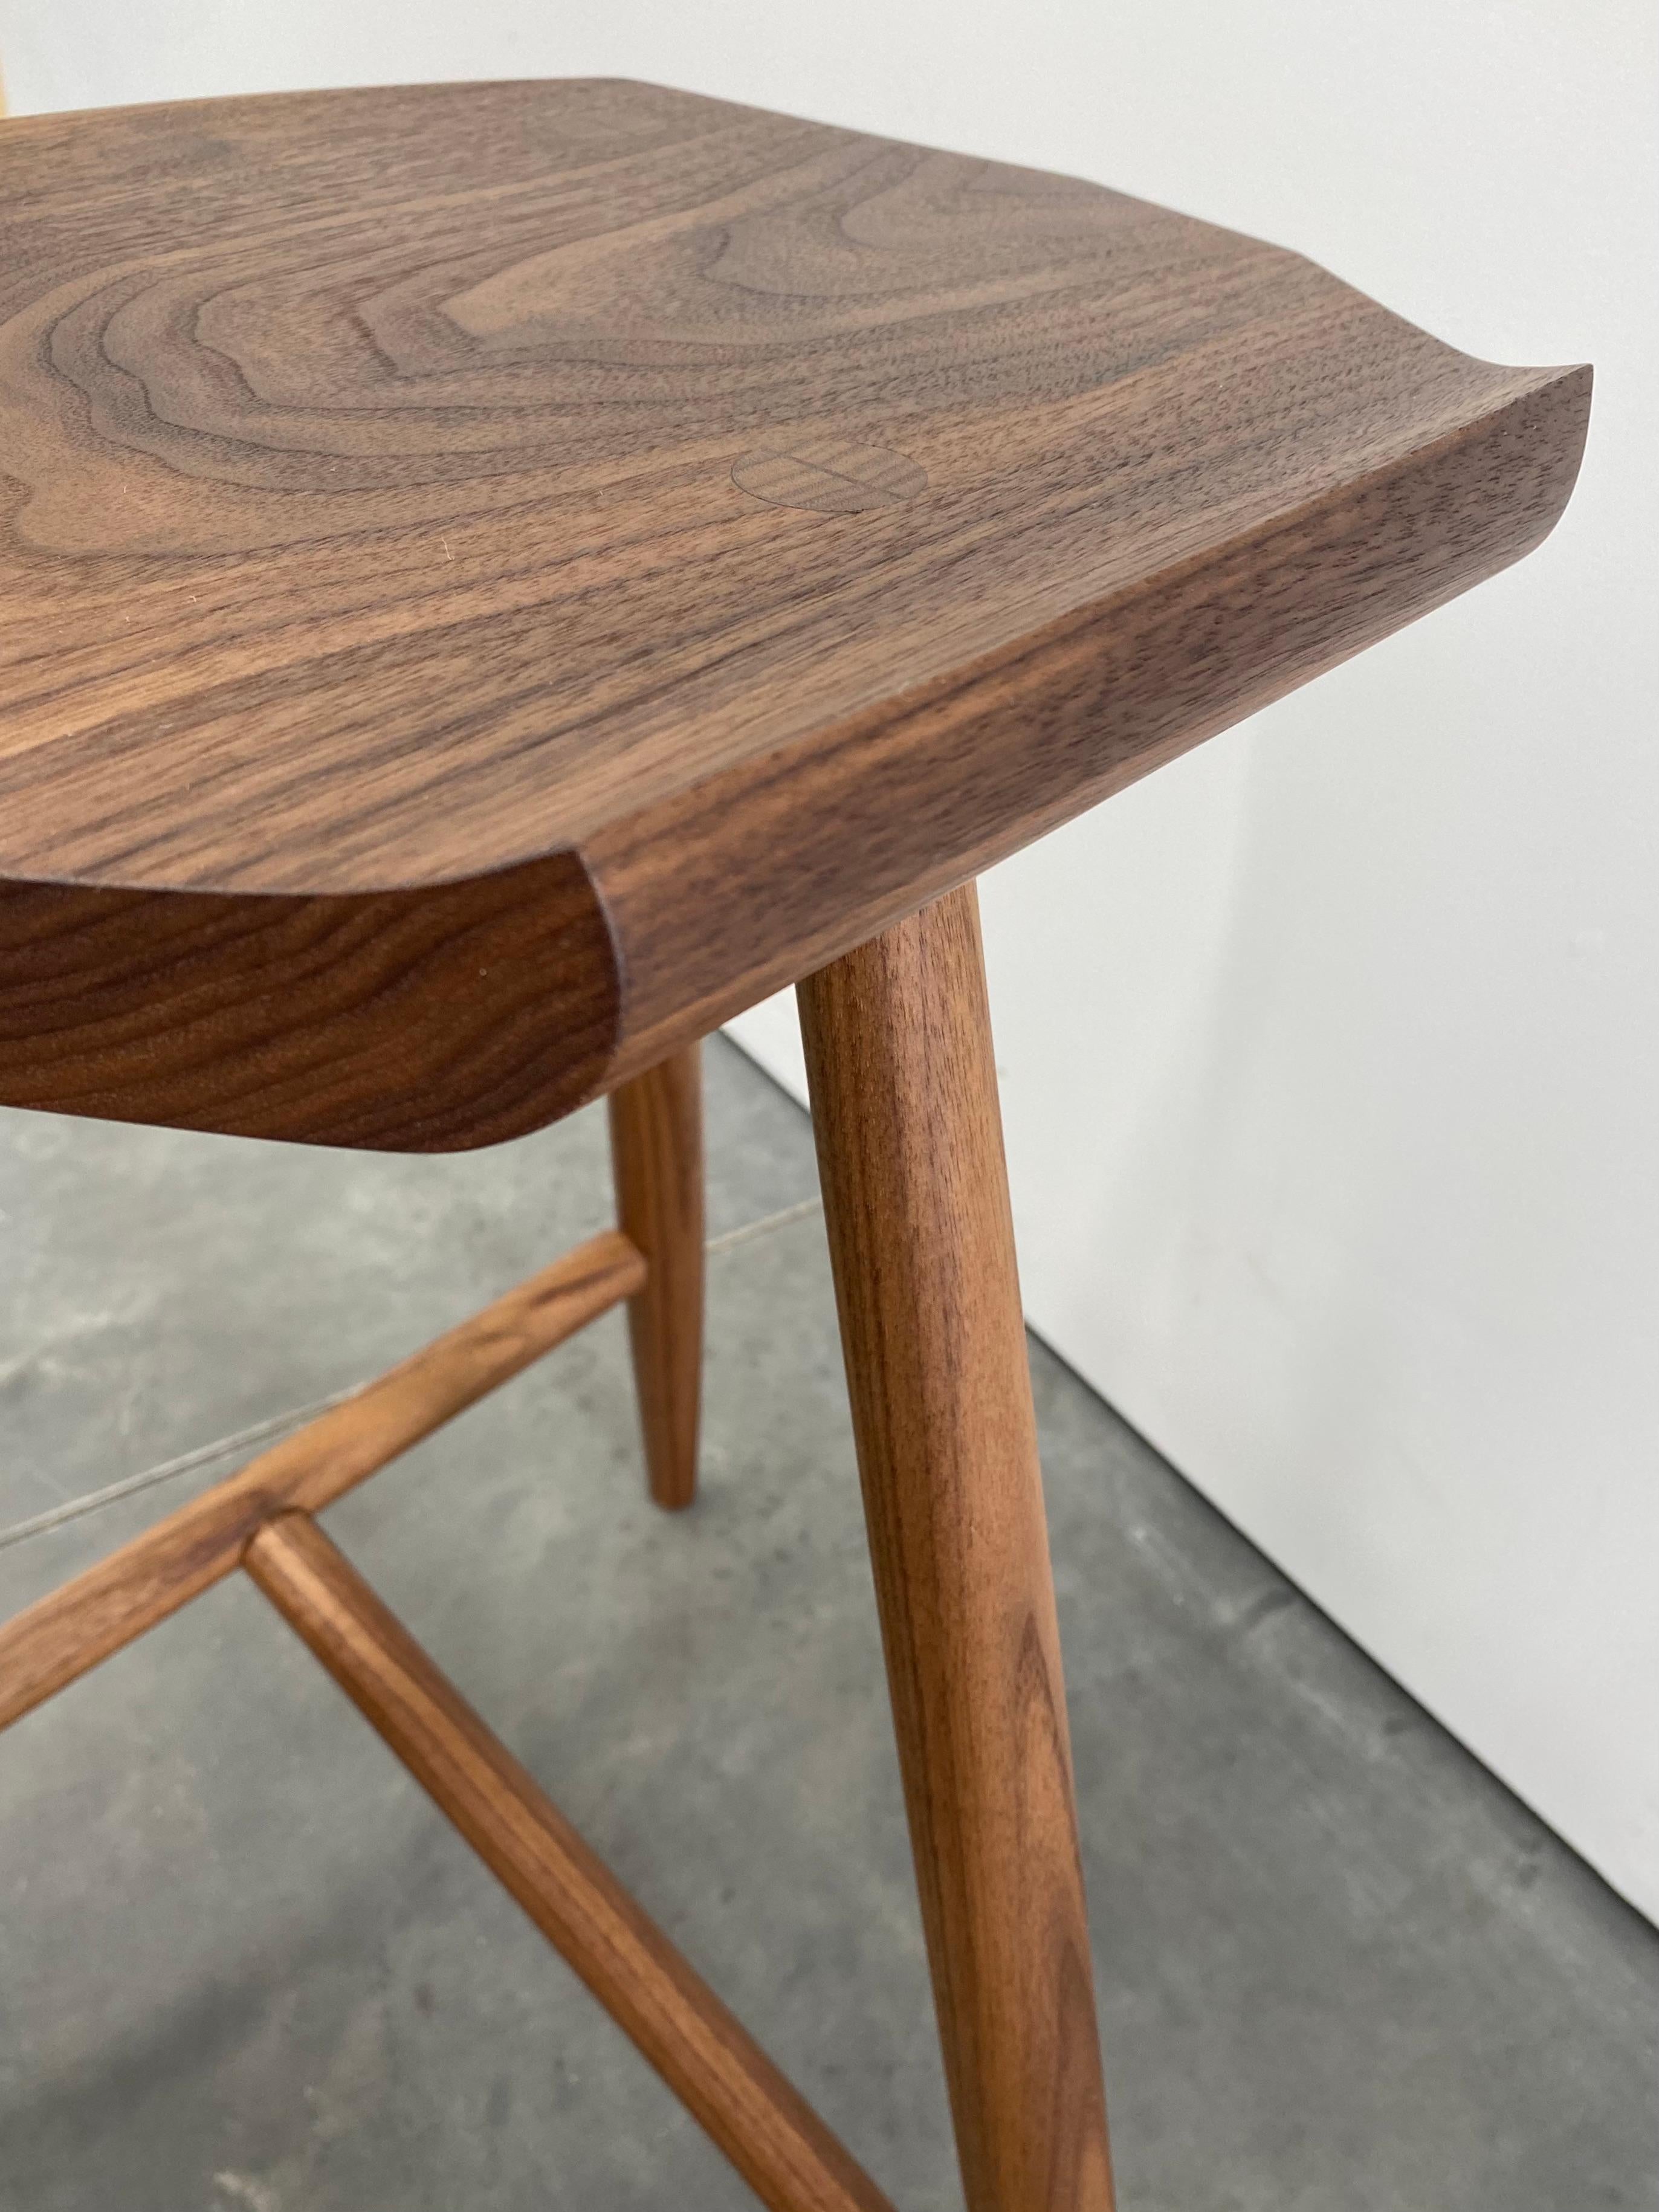 Hand-Crafted Jordan Walnut Counter Height 3-Legged Wood Stool by New York Heartwoods For Sale